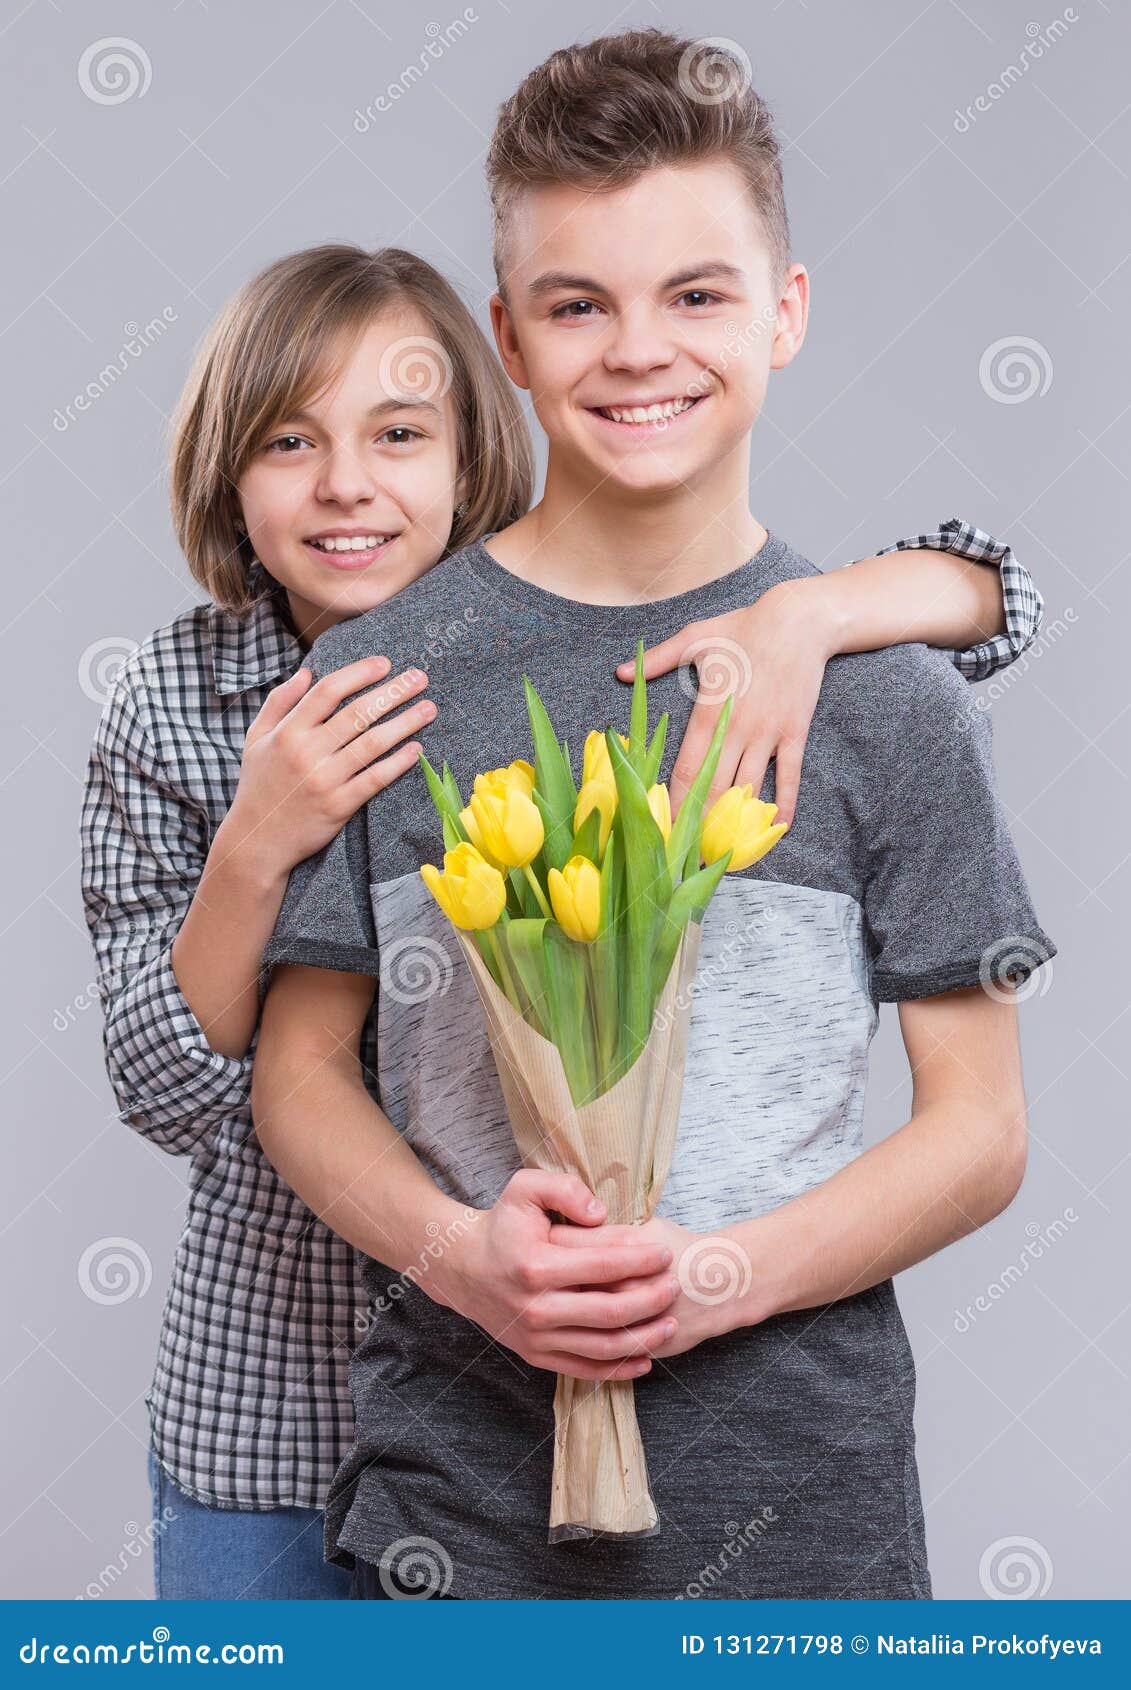 Teen Boy And Girl With Flowers Stock Photo Image Of Bouqu